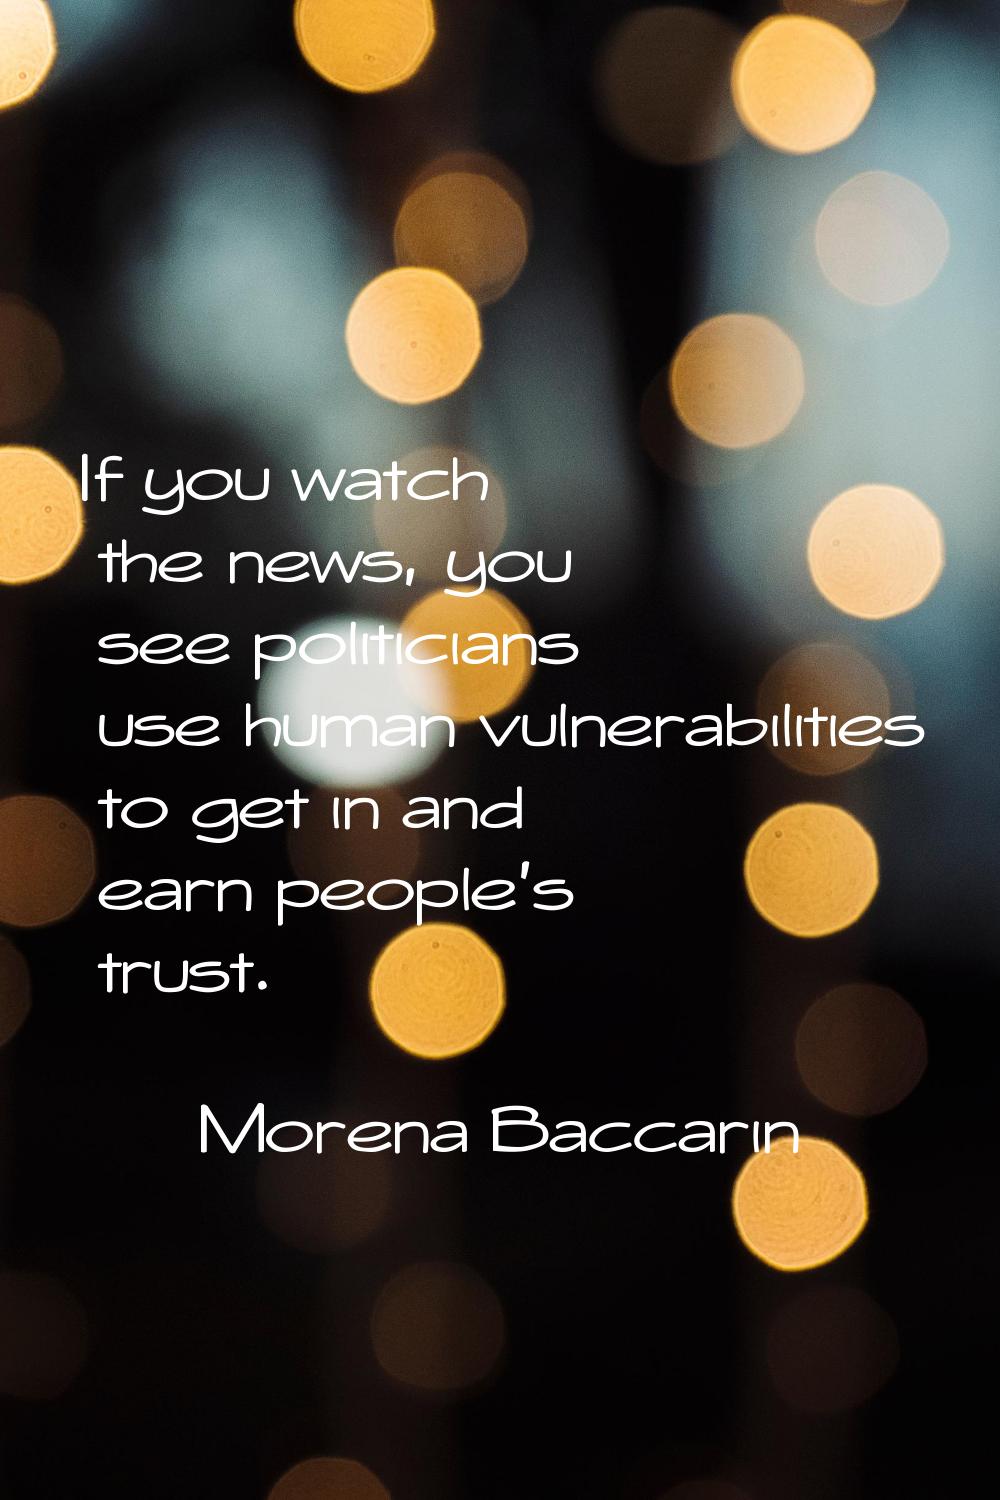 If you watch the news, you see politicians use human vulnerabilities to get in and earn people's tr